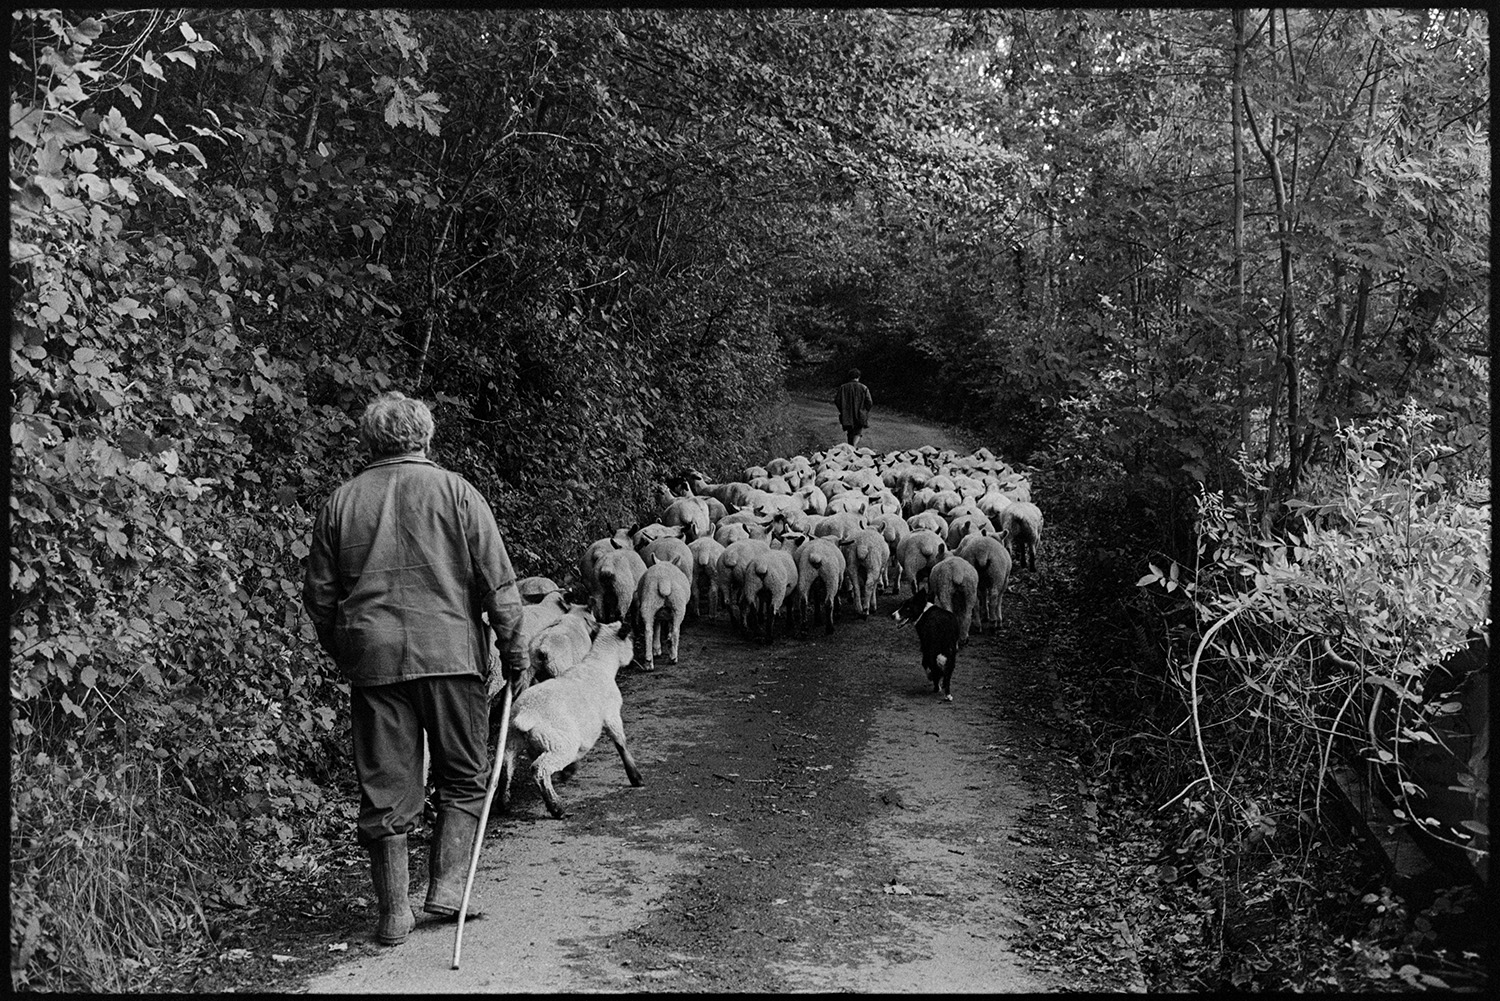 Farmer taking flock of sheep down lane. 
[John Squire and a dog herding a flock of sheep along a tree lined lane at Millhams, Dolton. Another person is walking ahead of the flock further down the lane.